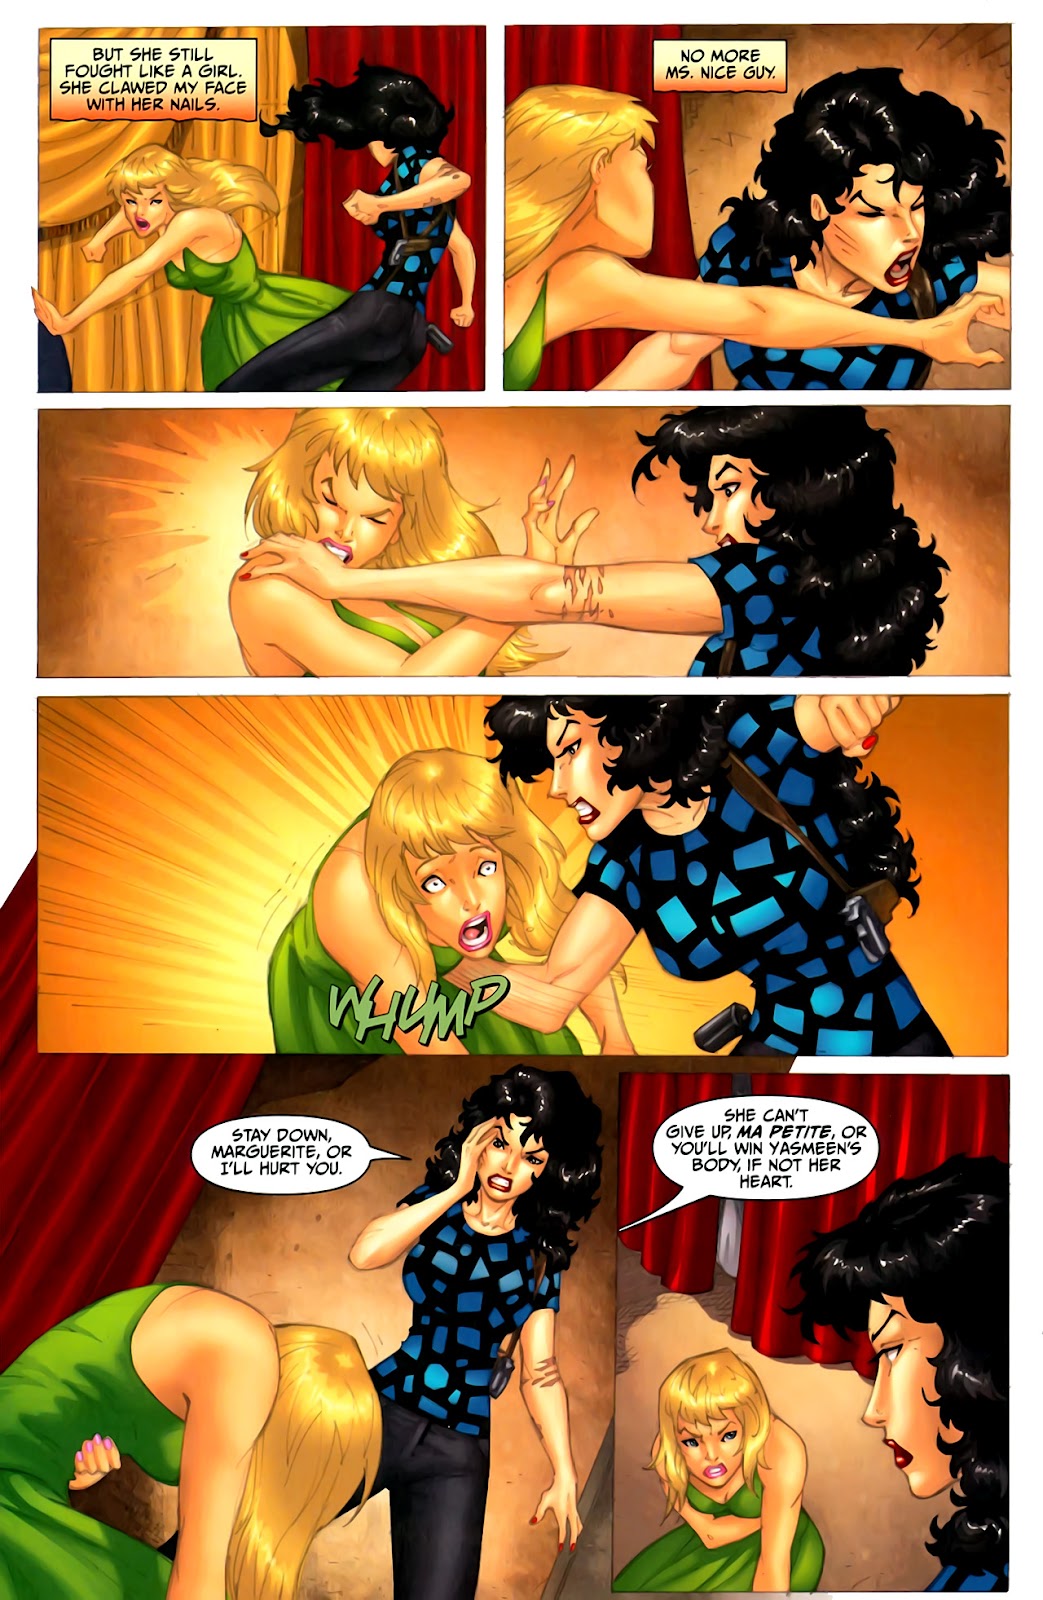 Anita Blake, Vampire Hunter: Circus of the Damned - The Charmer issue 2 - Page 26